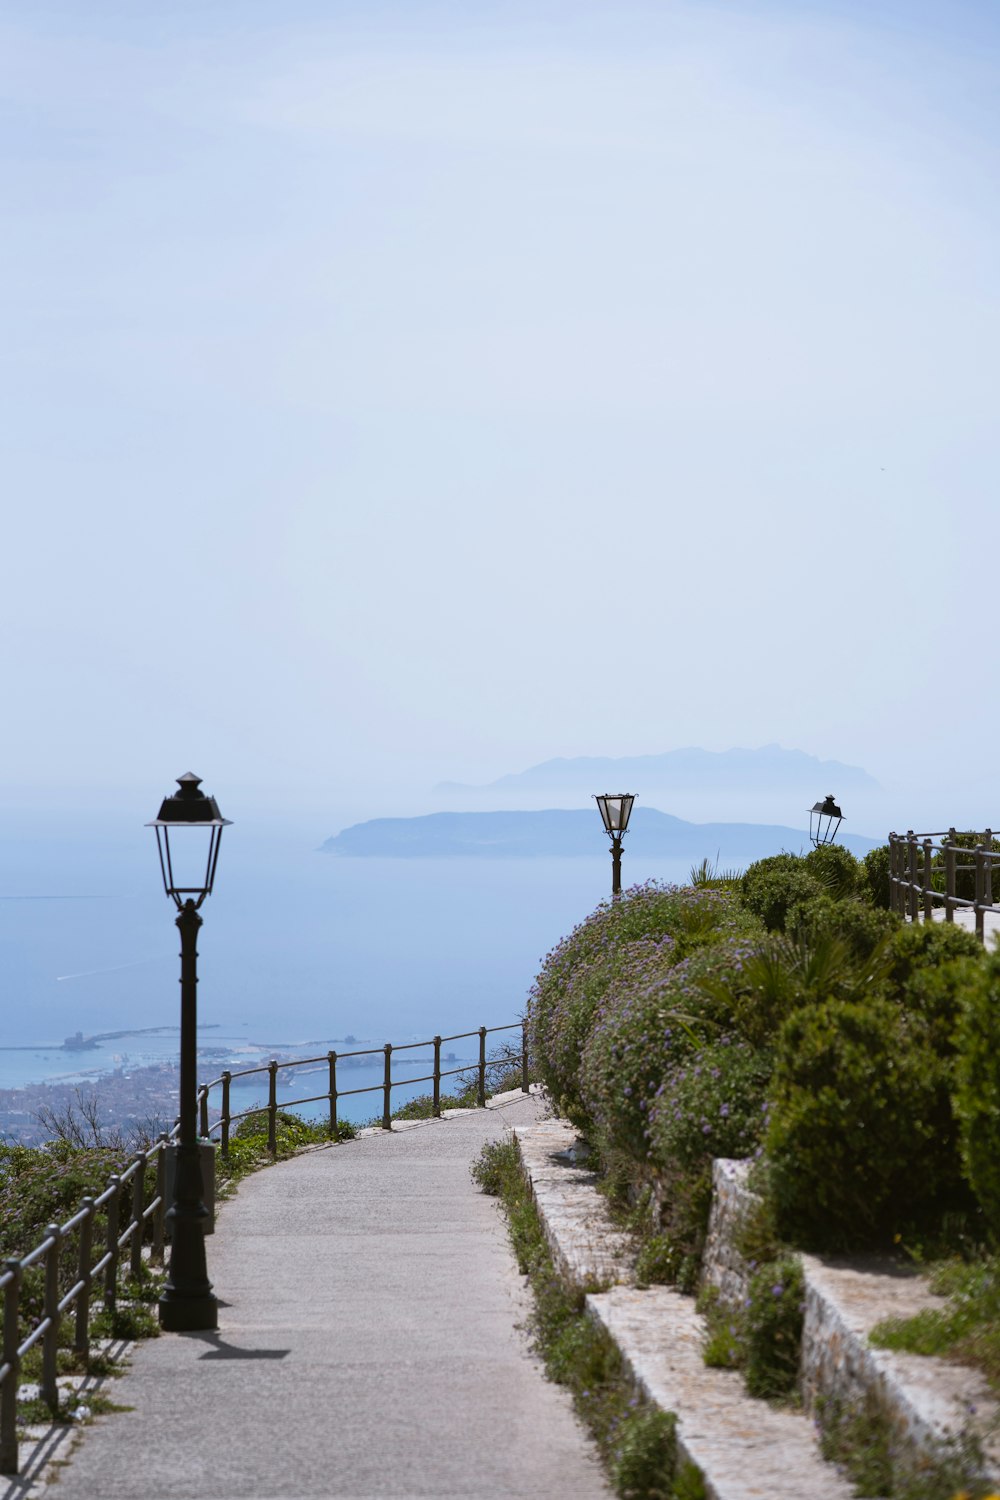 a walkway leading to the ocean with a lamp post in the foreground